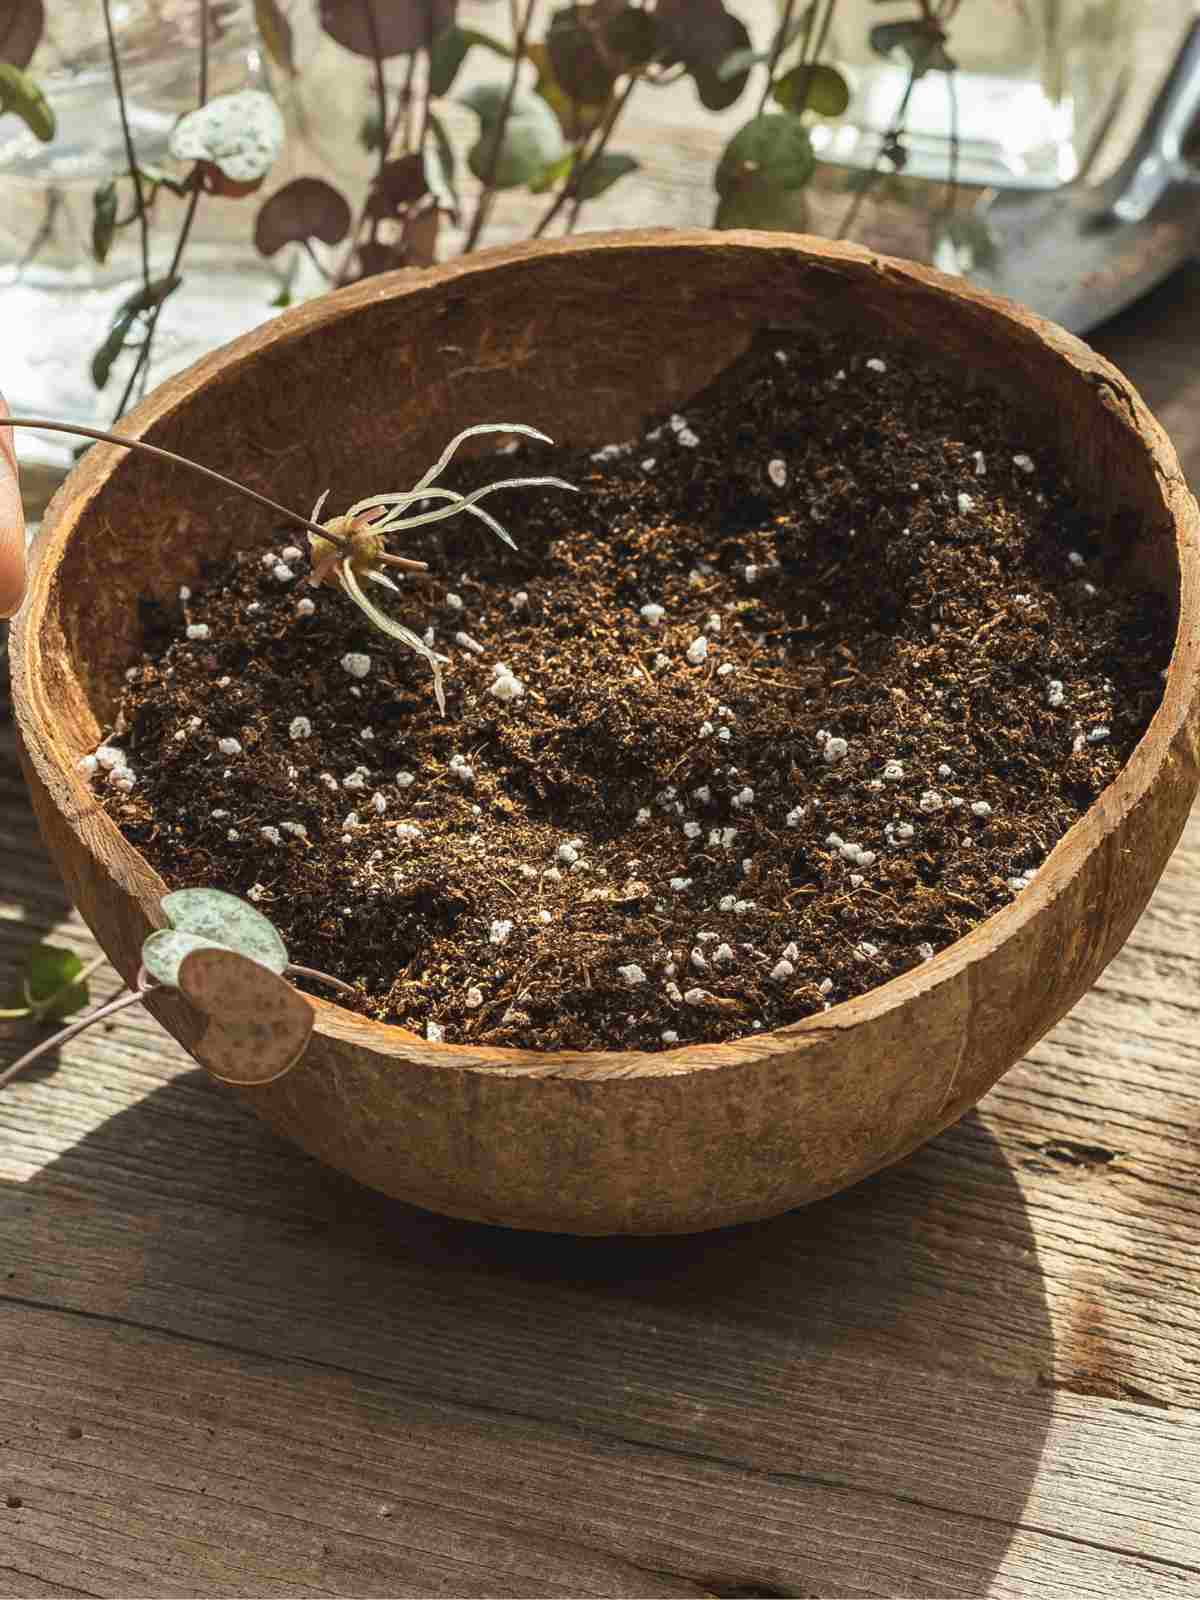 How to Make and Use Cactus Soil Mix